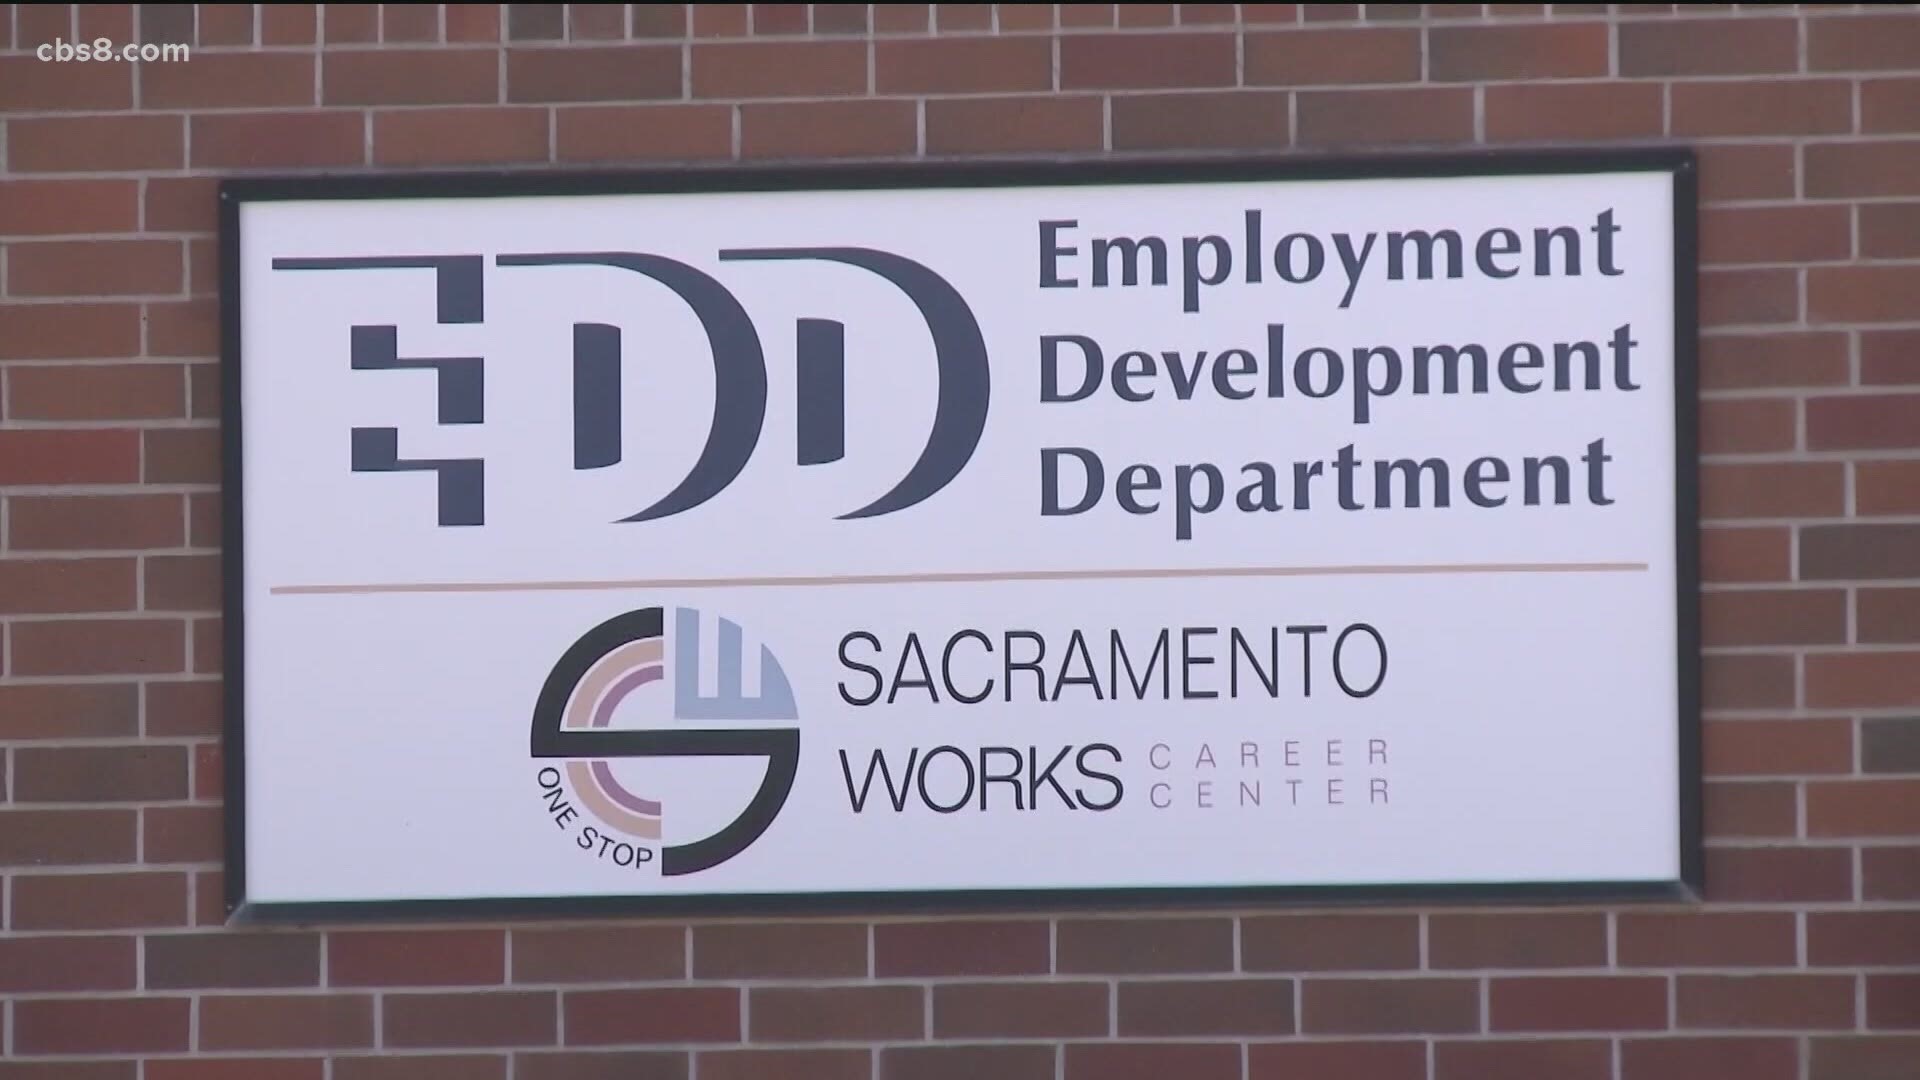 State lawmakers called for public hearings into the unemployment agency.